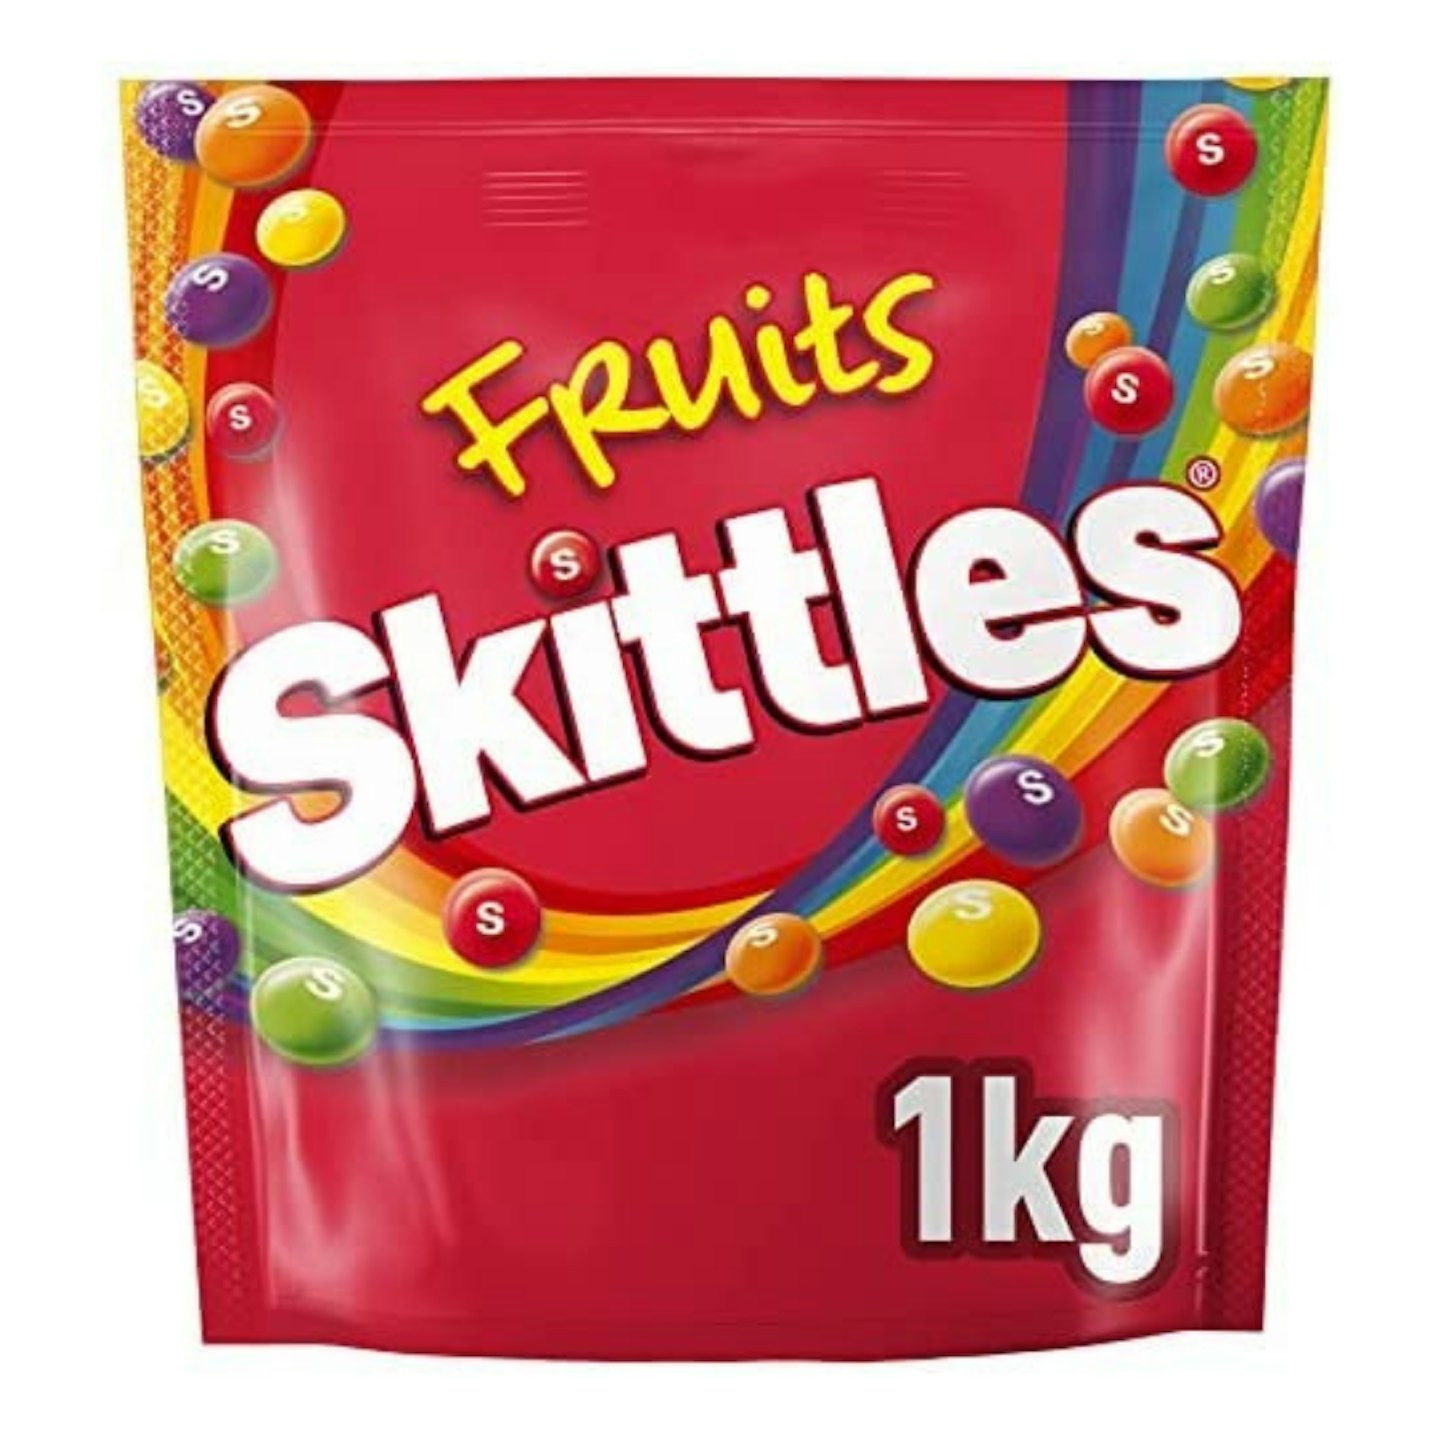 Skittles Sweets